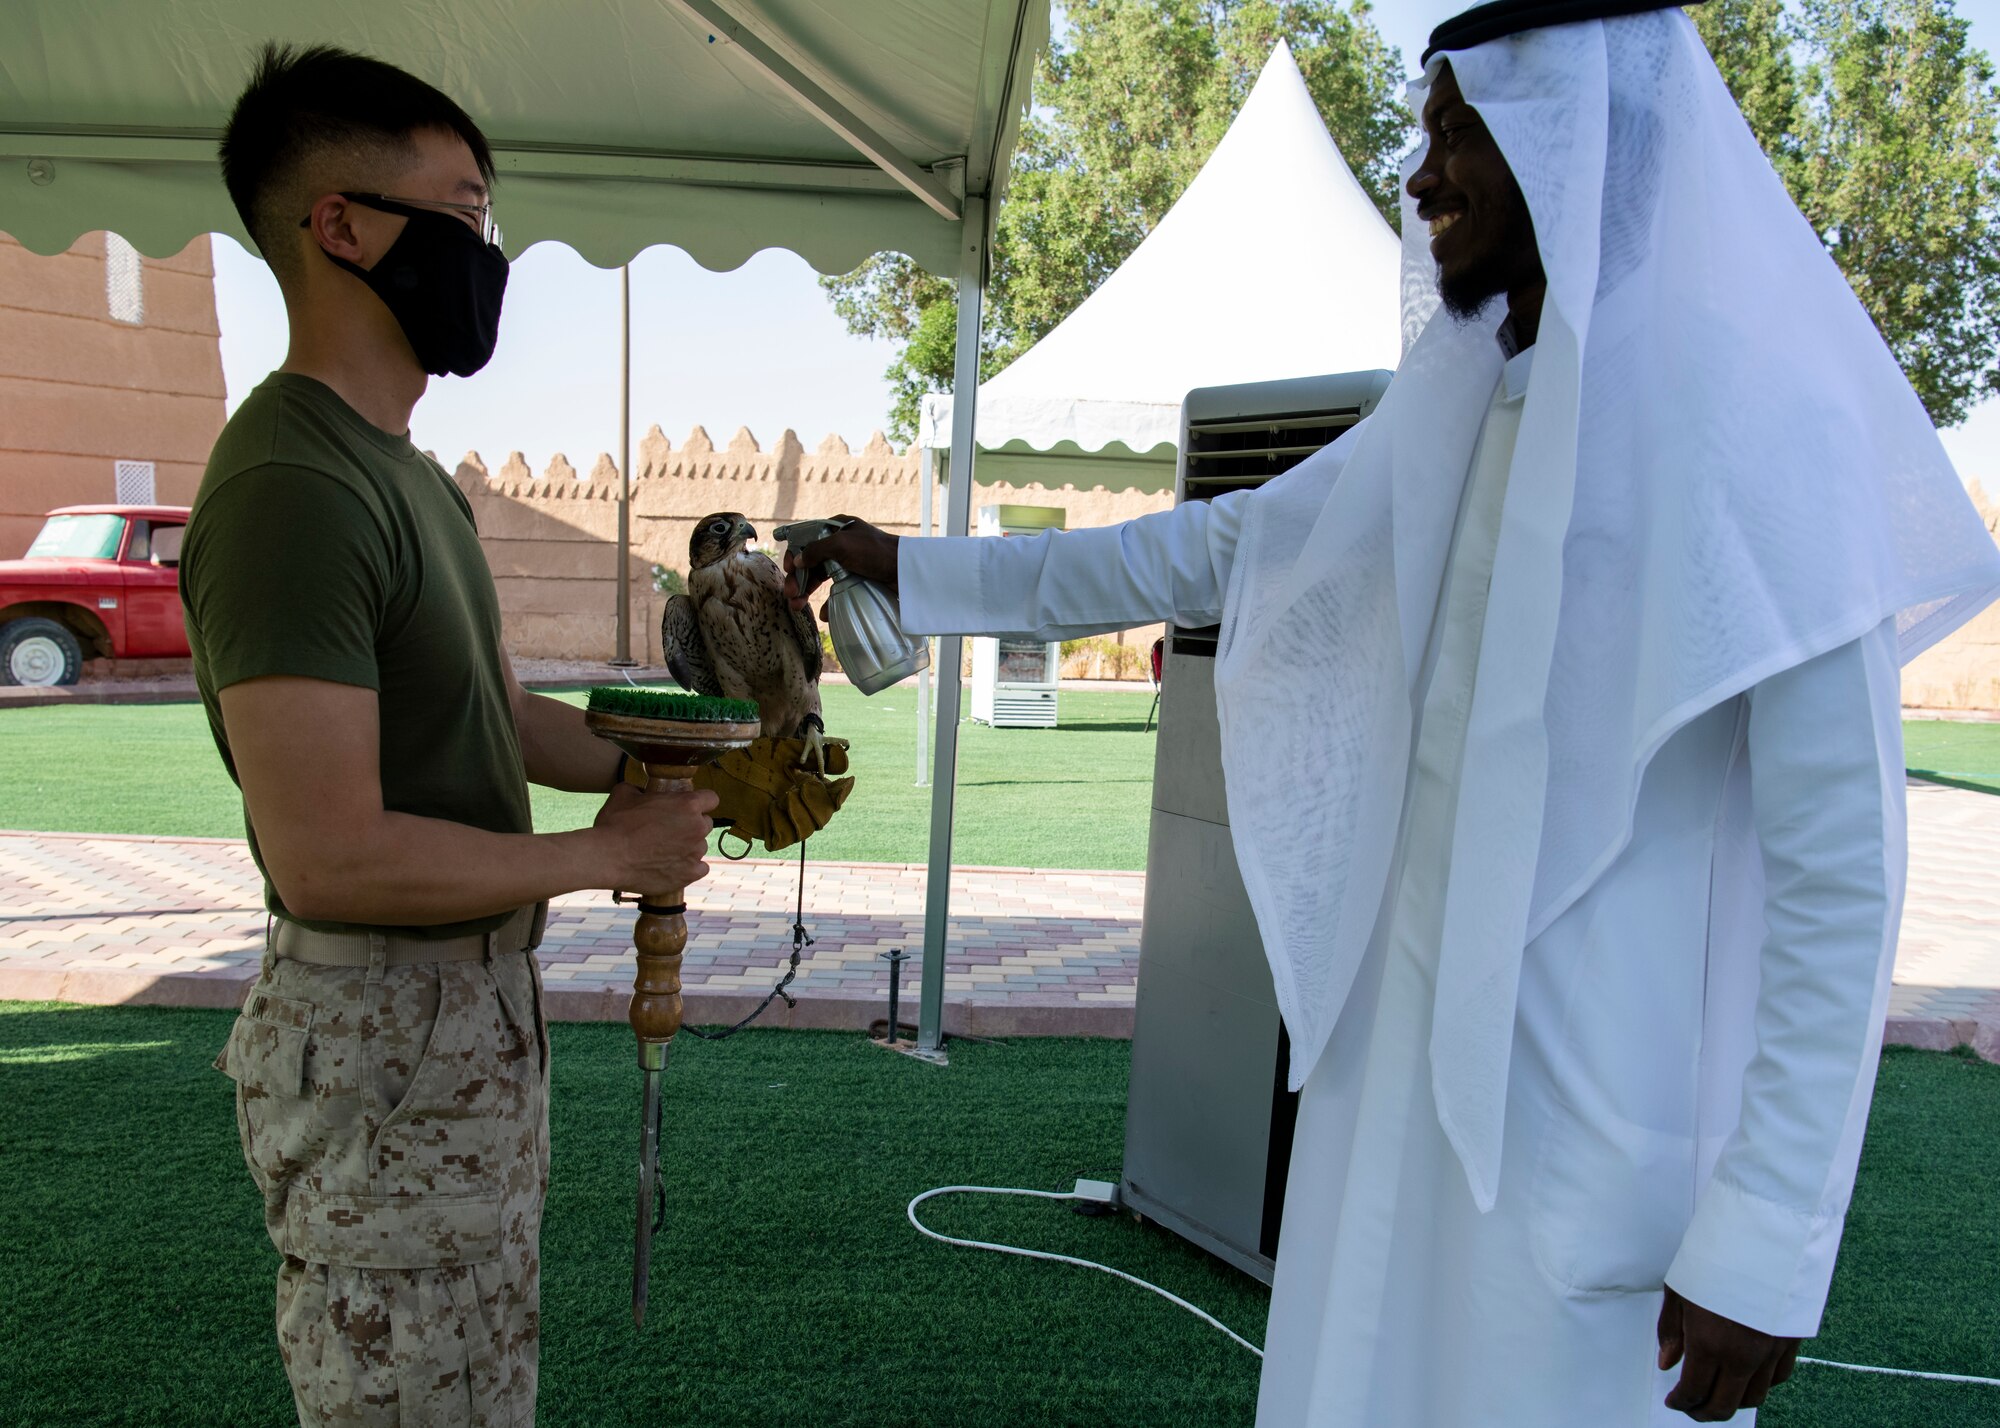 More than 500 U.S. service members from across Prince Sultan Air Base attended the third Saudi Cultural Days at the PSAB Museum, Kingdom of Saudi Arabia, Oct. 14 to Oct. 16, 2021. The event was hosted through a collaborative effort between the Scientist Gifts Program, local members of the Royal Saudi Air Force, and the 378th Air Expeditionary Wing Host Nation Coordination Cell, to provide an opportunity for joint U.S. forces to learn about the history, culture and traditions of the nation of Saudi Arabia. Event attendees received an informational presentation, toured the museum, interacted with native animals, tried on traditional Saudi Arabian clothing, and enjoyed dates, tea, and other local food.